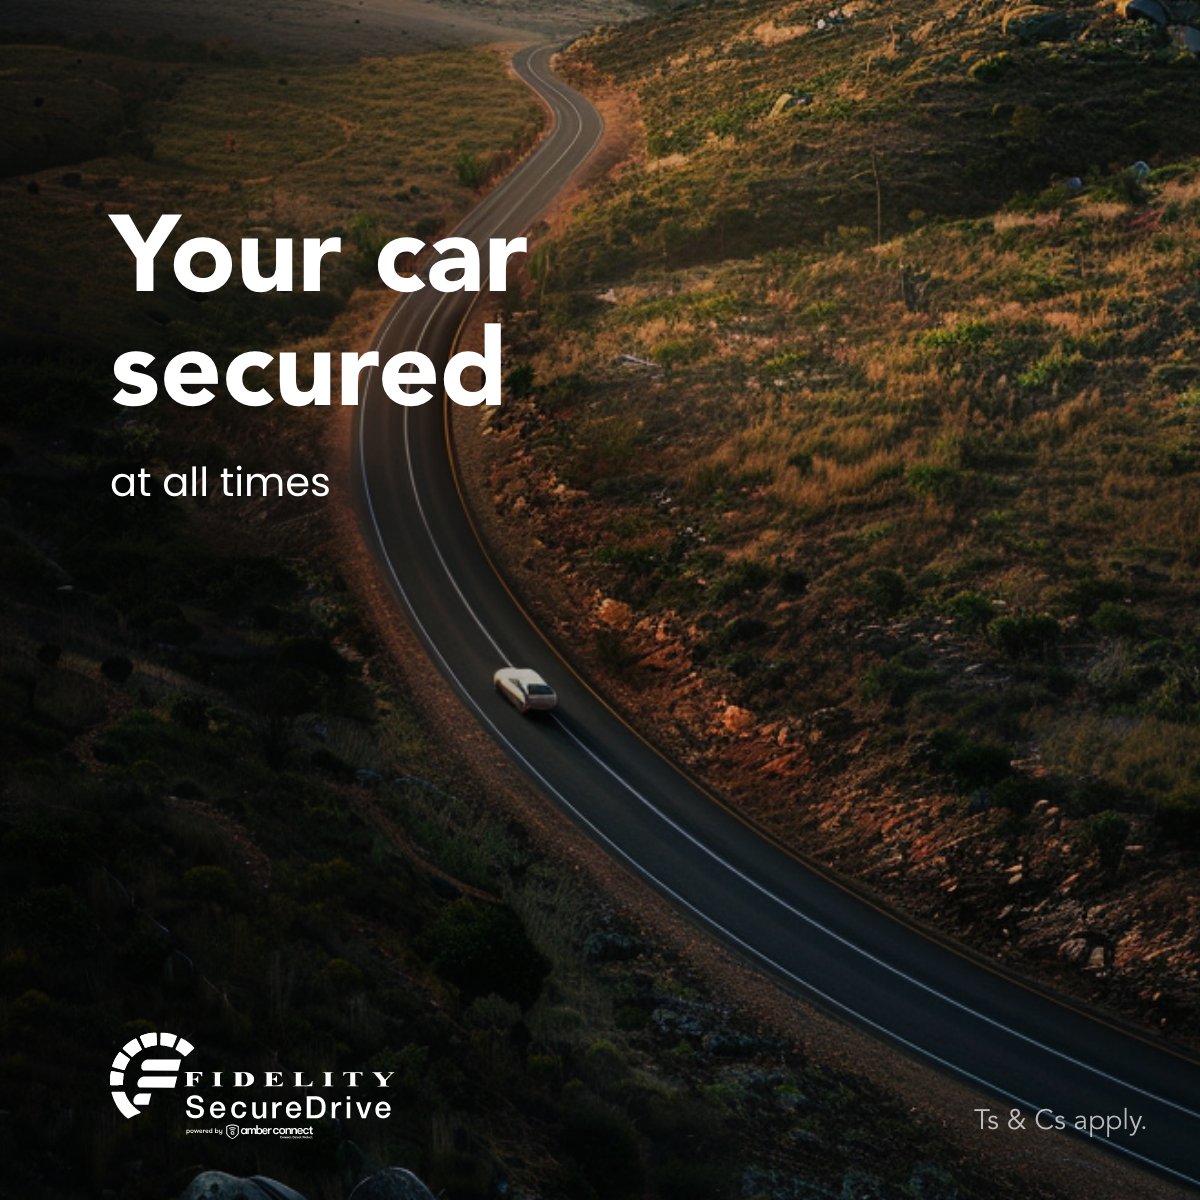 Taking the scenic route, or during your daily runaround - keep your car safe 24/7 with Fidelity SecureDrive.

#FidelitySecureDrive #VehicleTracking #YourDrivingCompanion